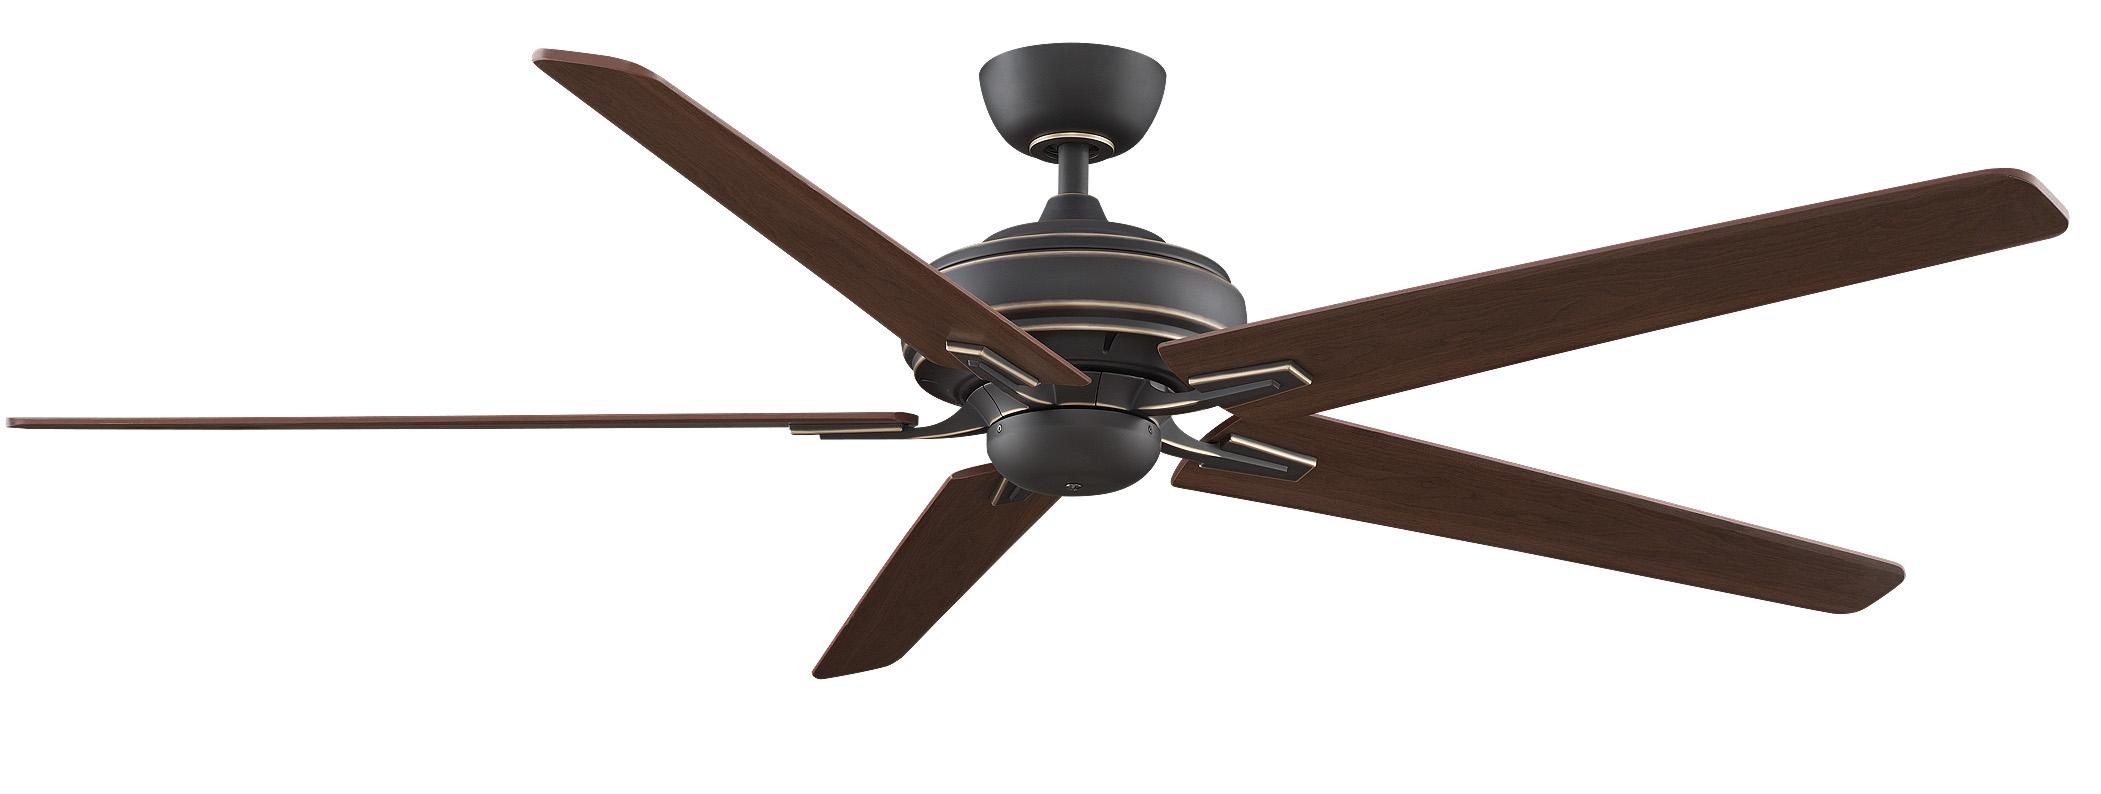 Bronze Ceiling Fans Without Lights